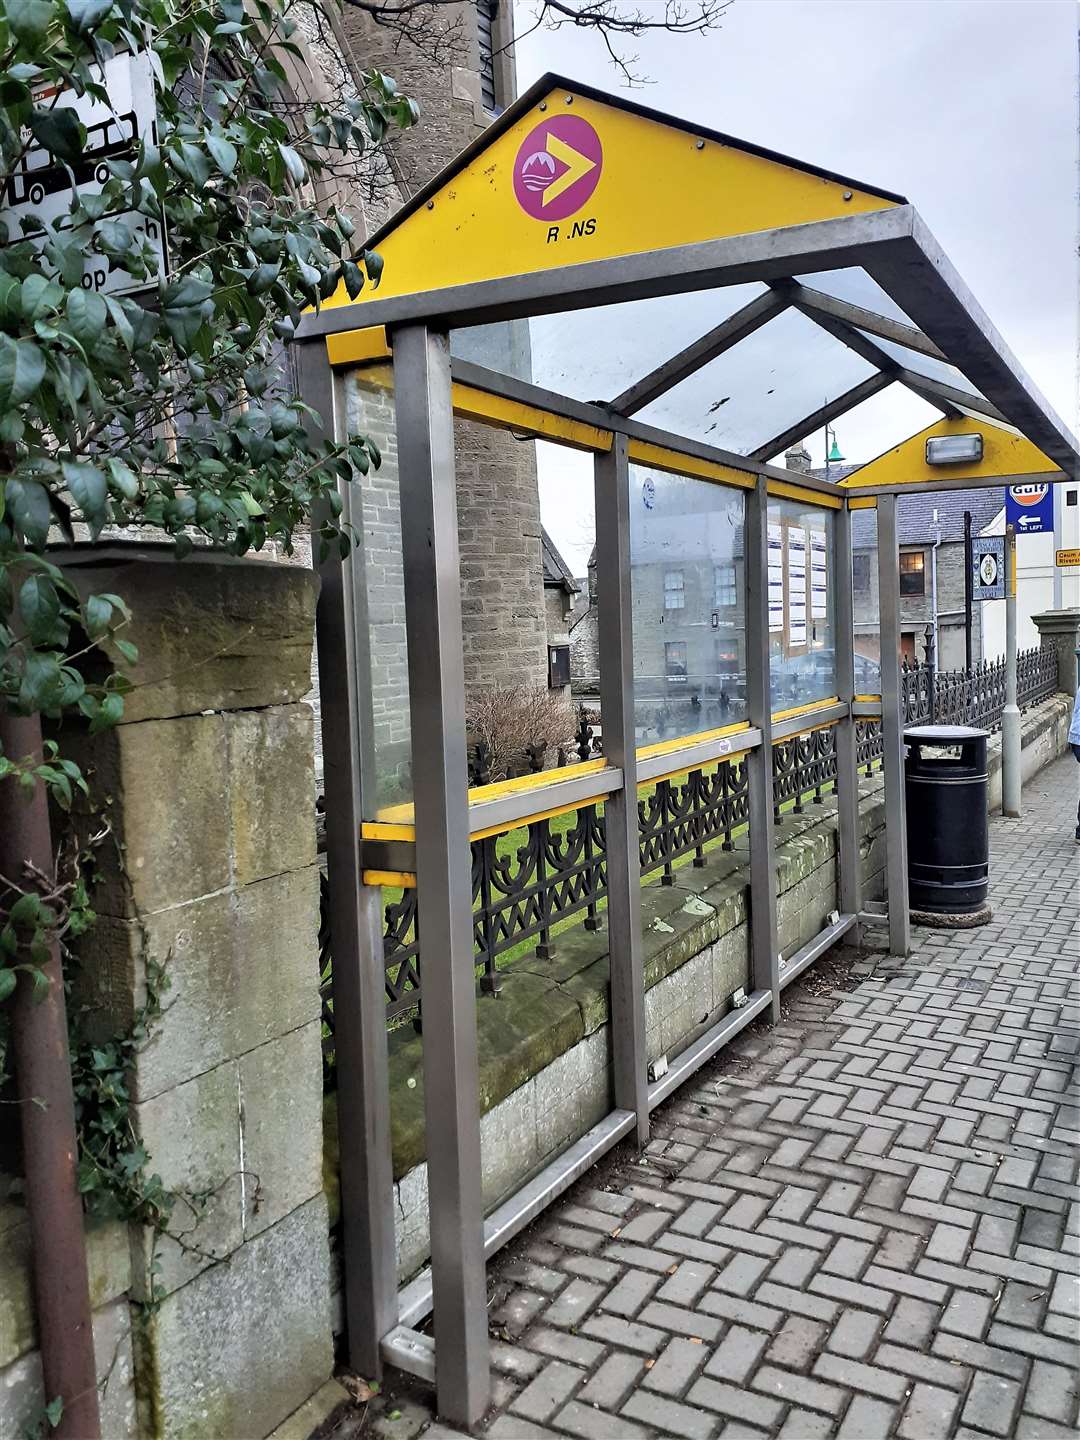 Panels are missing from this bus shelter.